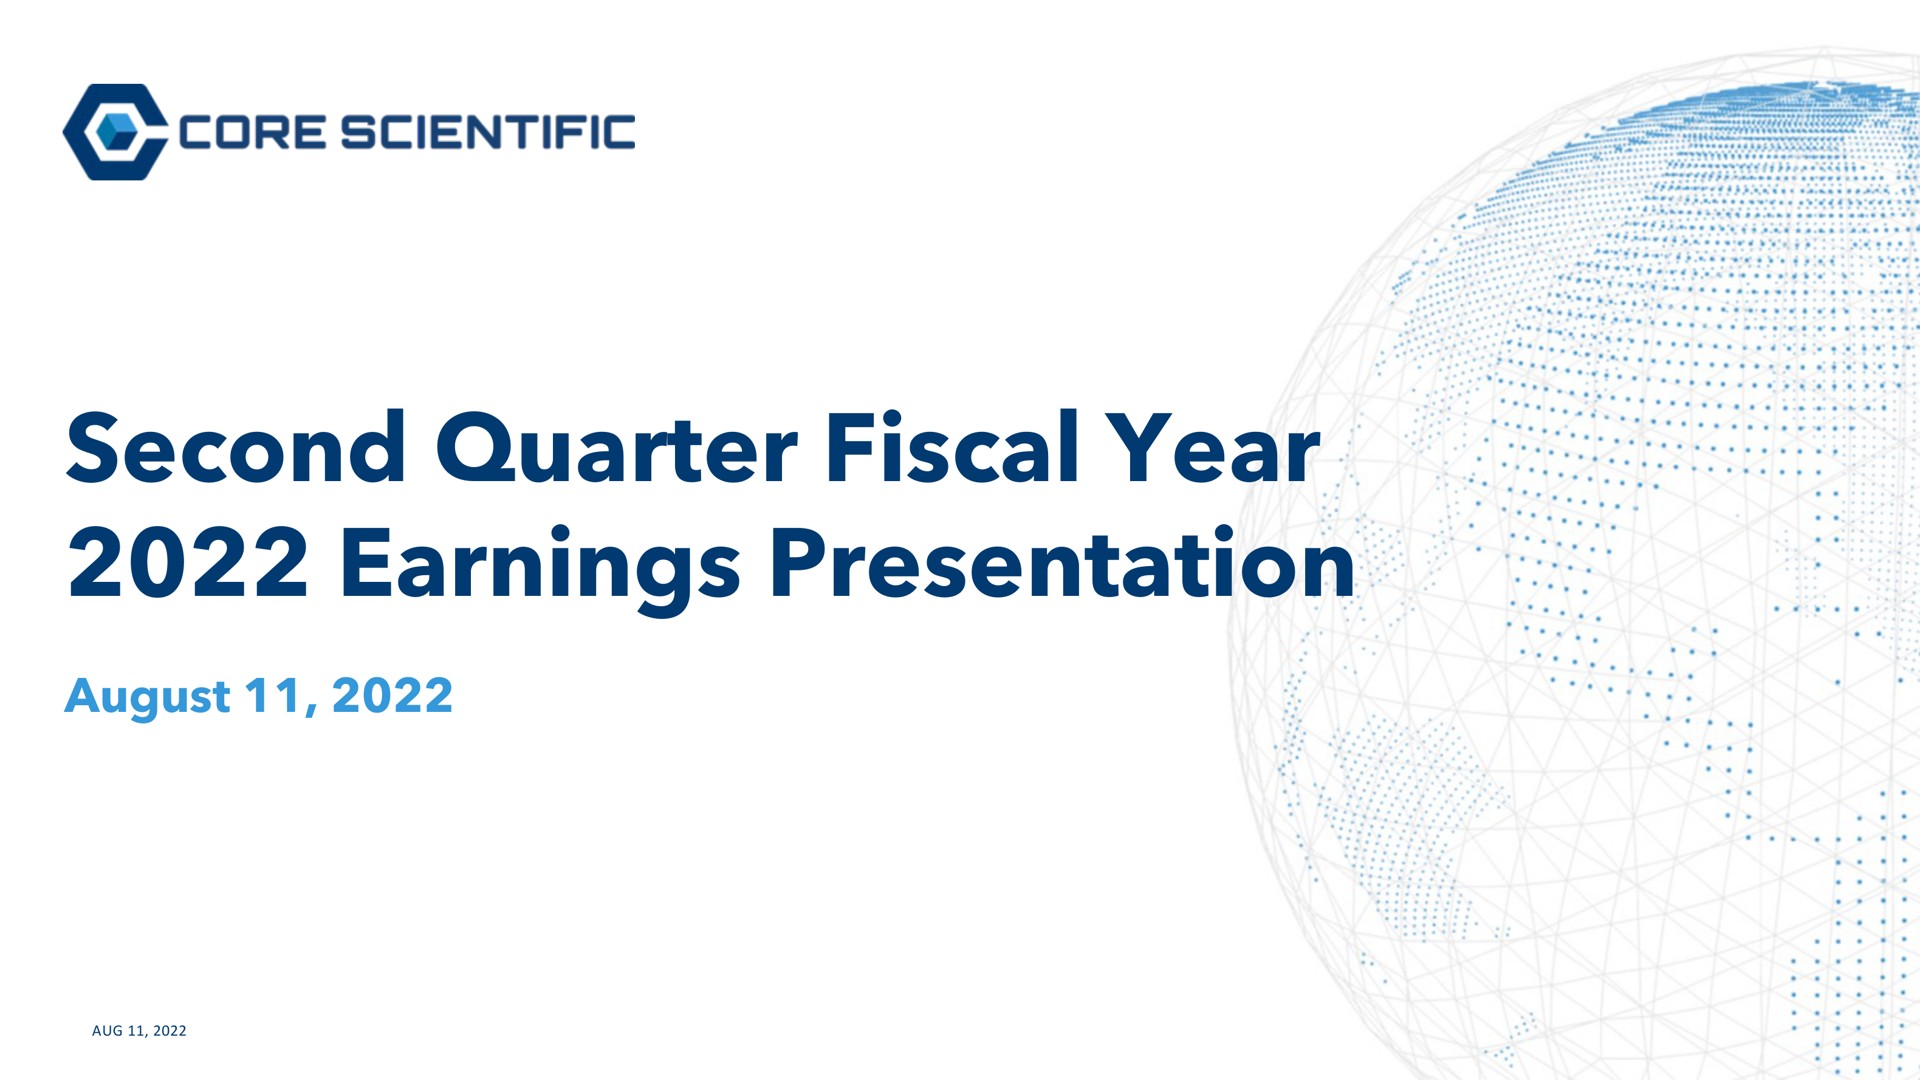 second quarter fiscal year earnings presentation august oes | Core Scientific